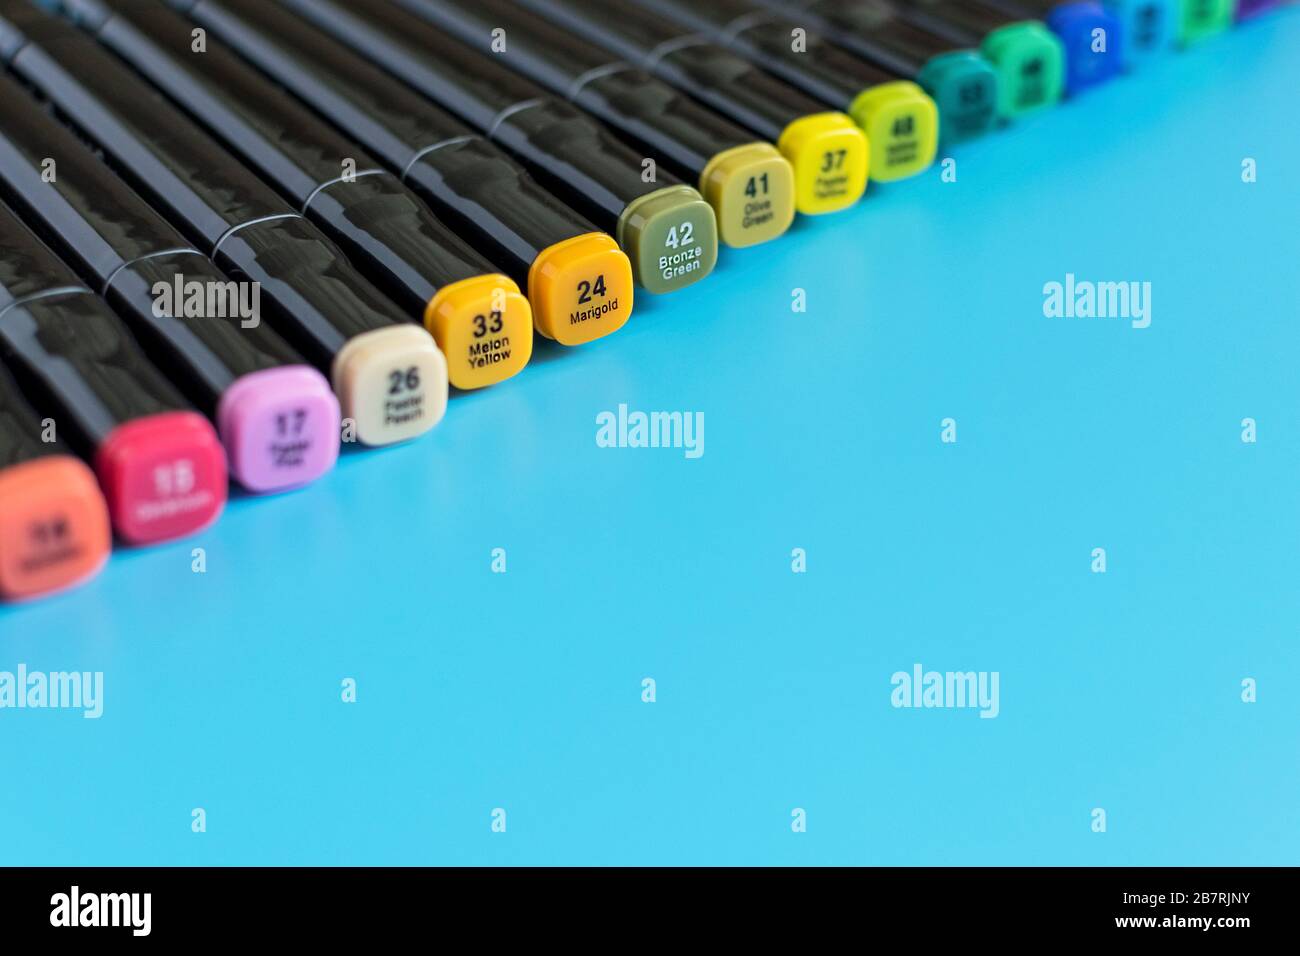 https://c8.alamy.com/comp/2B7RJNY/multi-colored-markers-on-a-blue-background-marker-for-drawing-and-creativity-2B7RJNY.jpg